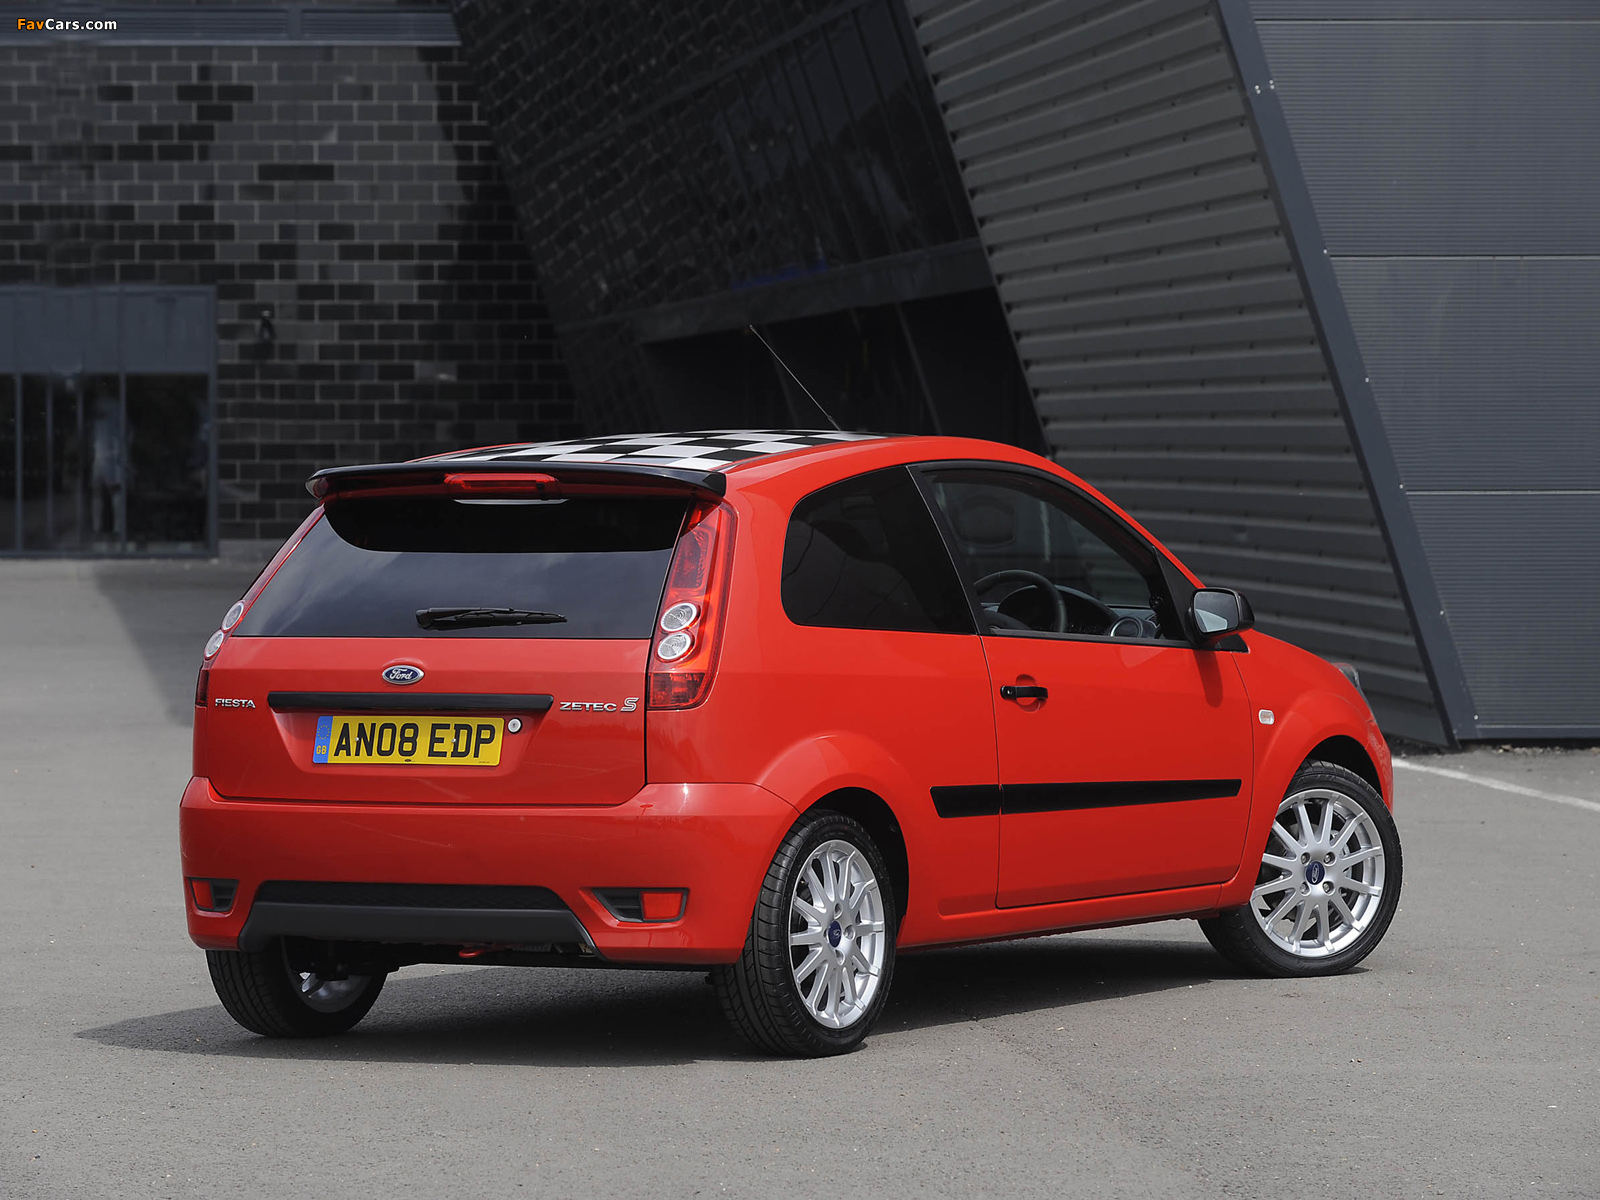 Ford Fiesta Zetec S Red 2008 pictures (1600 x 1200)